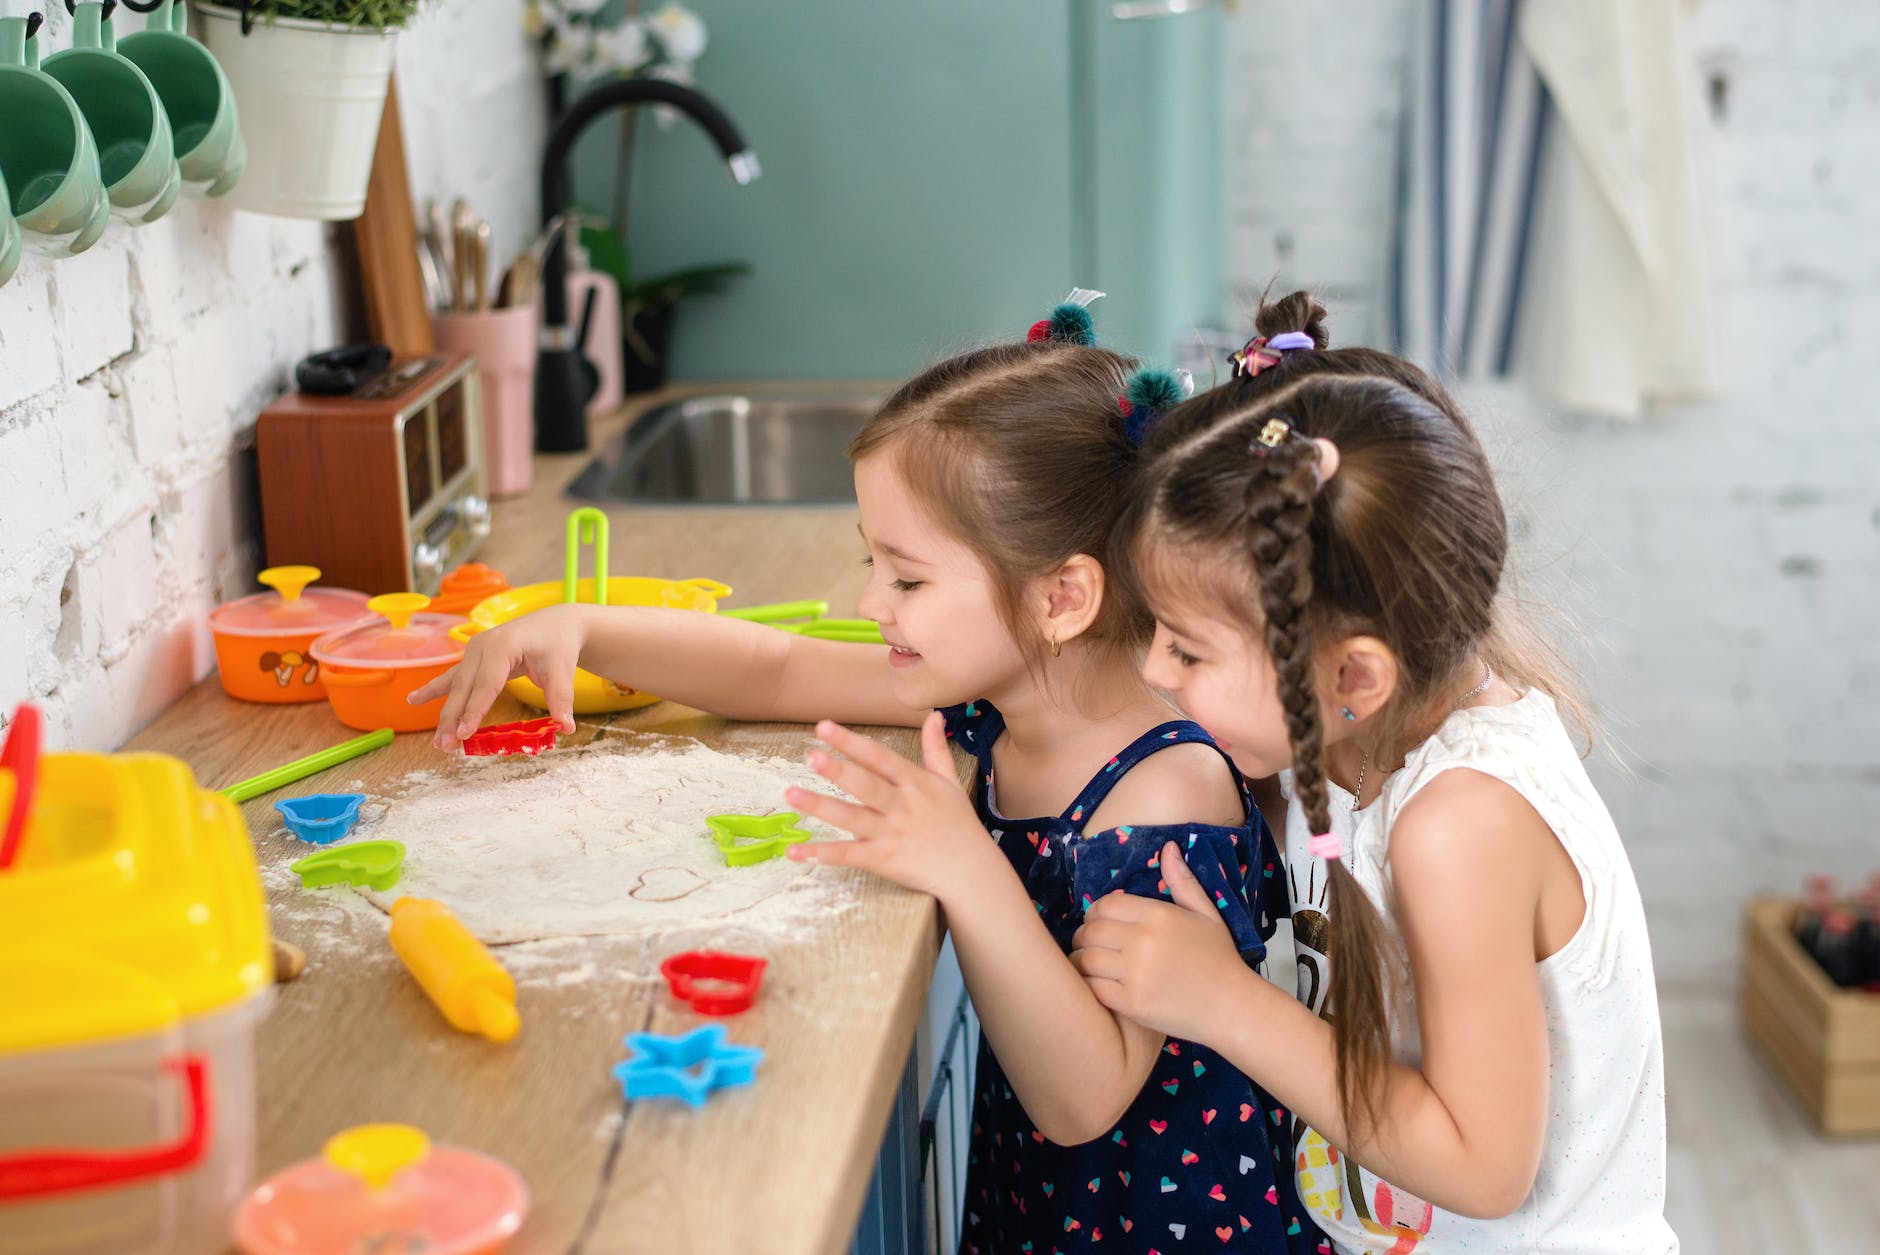 two girls playing with flour on a wooden kitchen counter